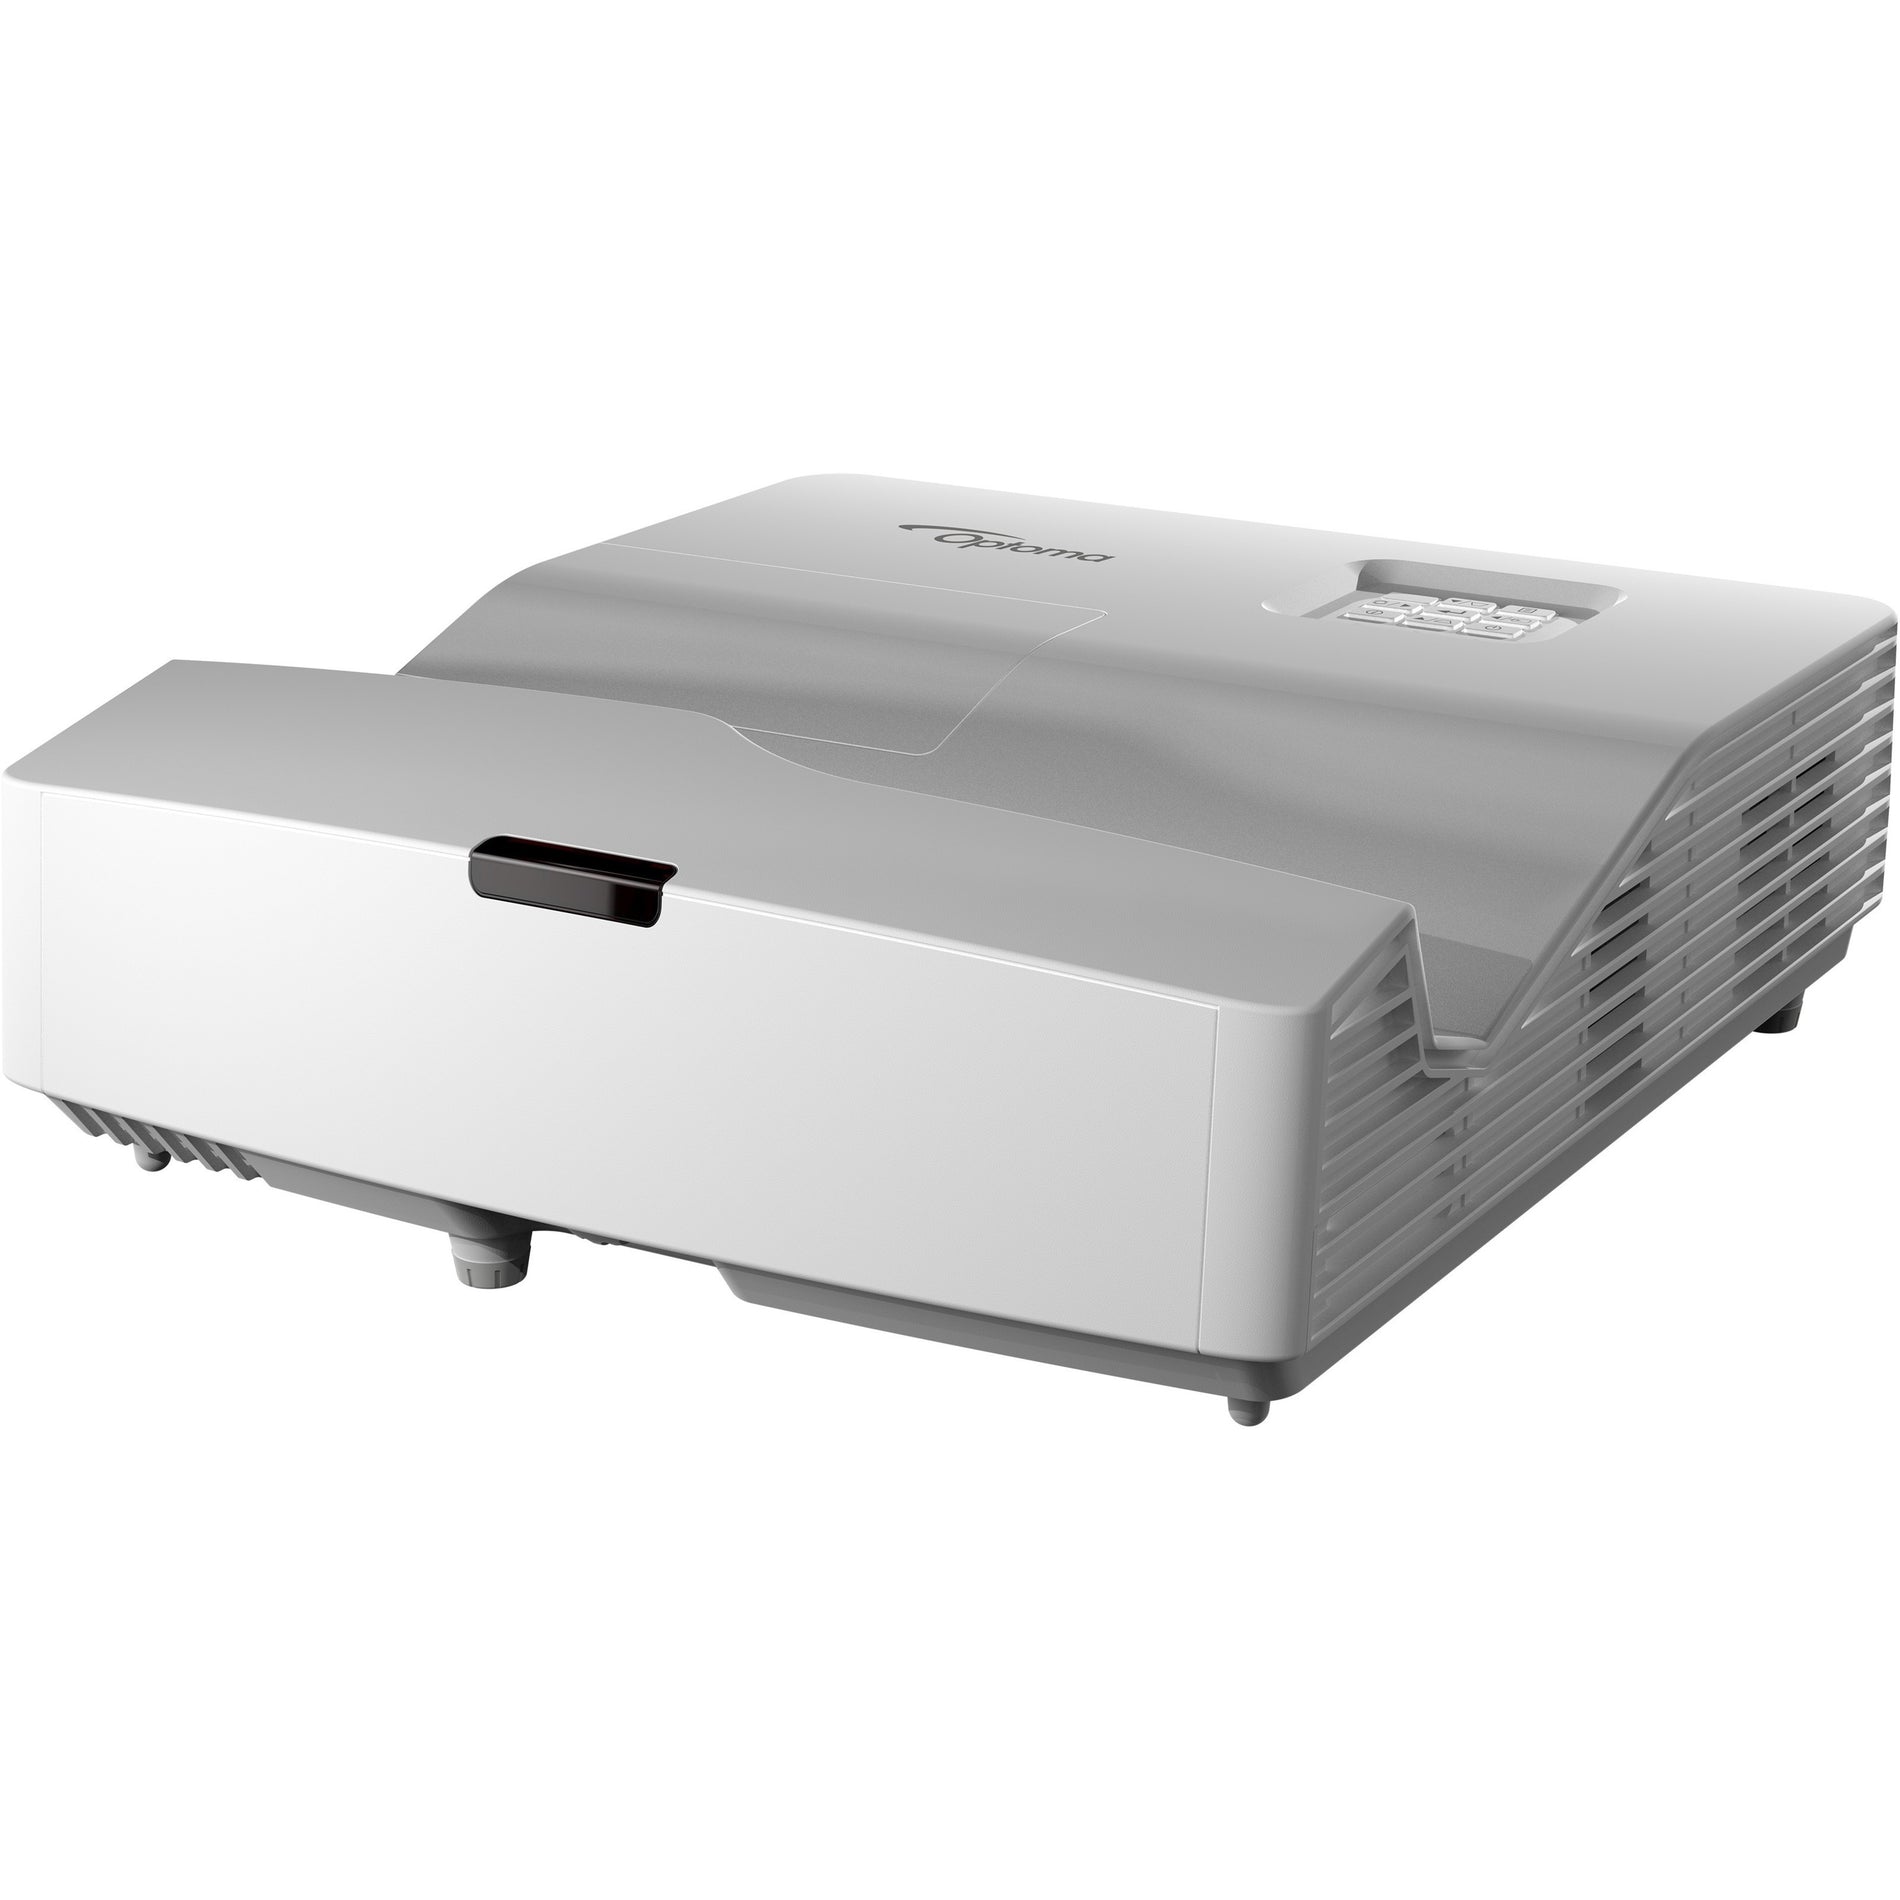 Optoma EH340UST Ultra Short Throw DLP Projector, 16:9, 4000 lm, 1080p, 3D